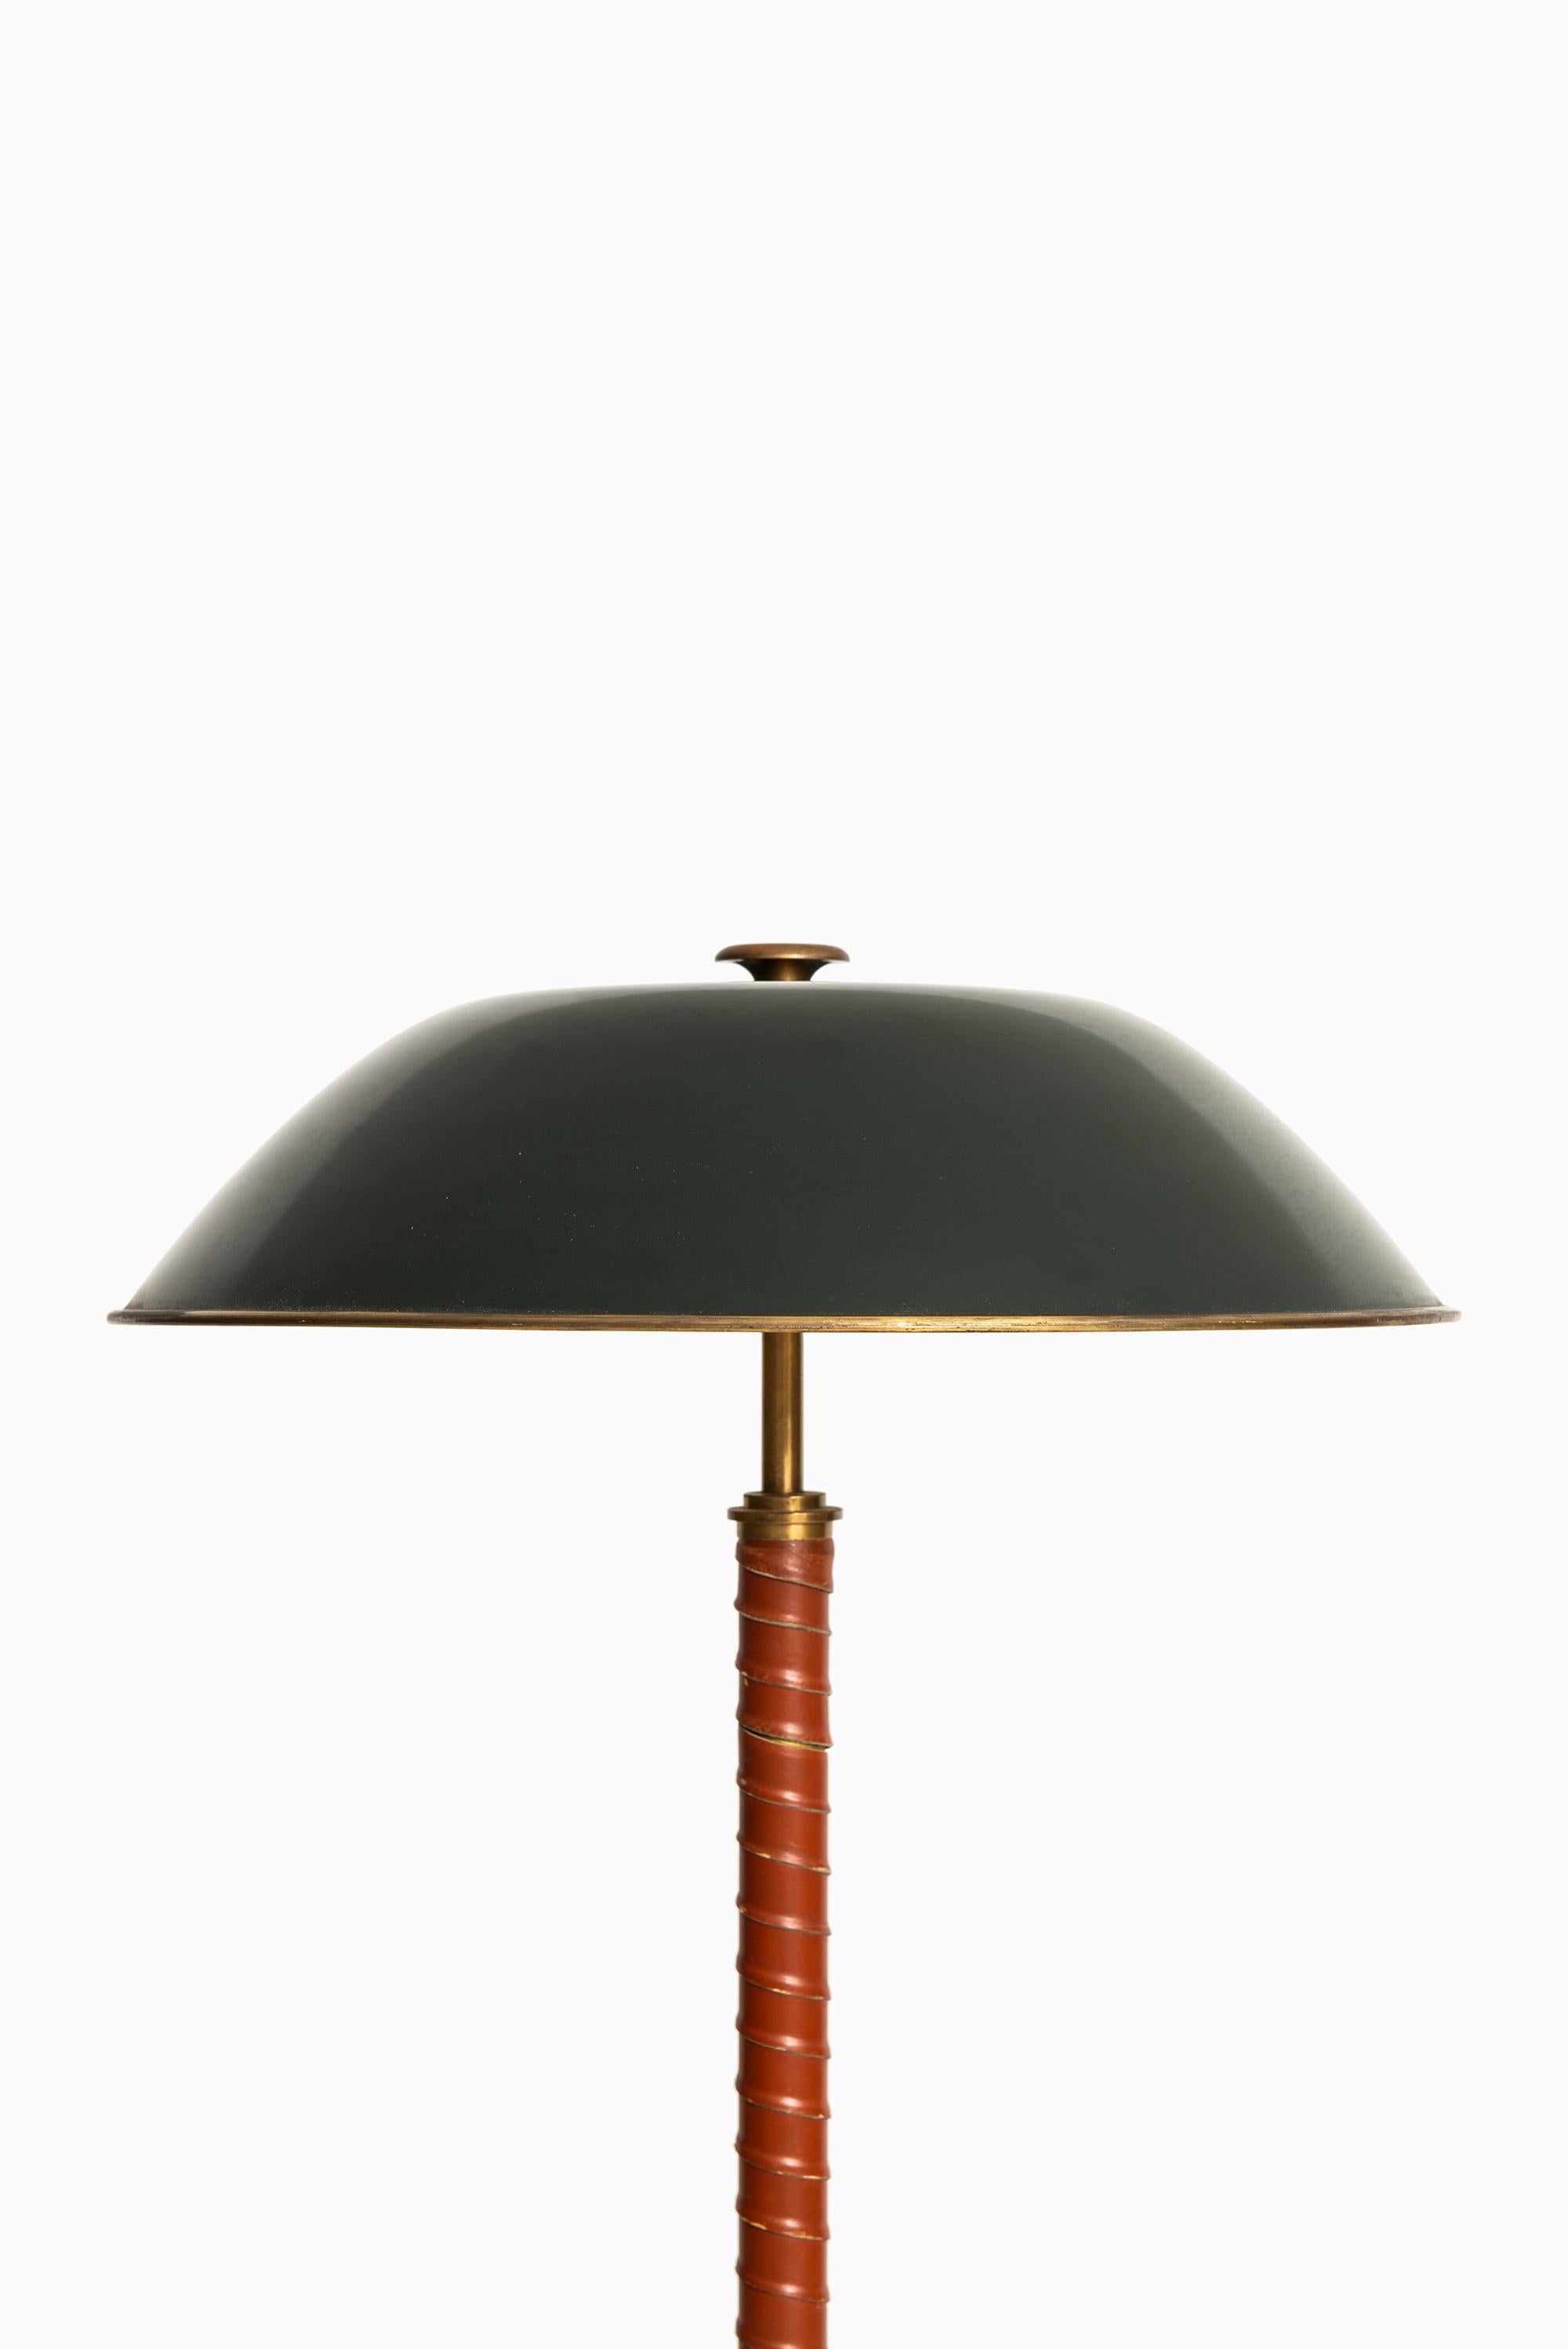 Scandinavian Modern Harald Notini Attributed to Table Lamp Produced by Böhlmarks in Sweden